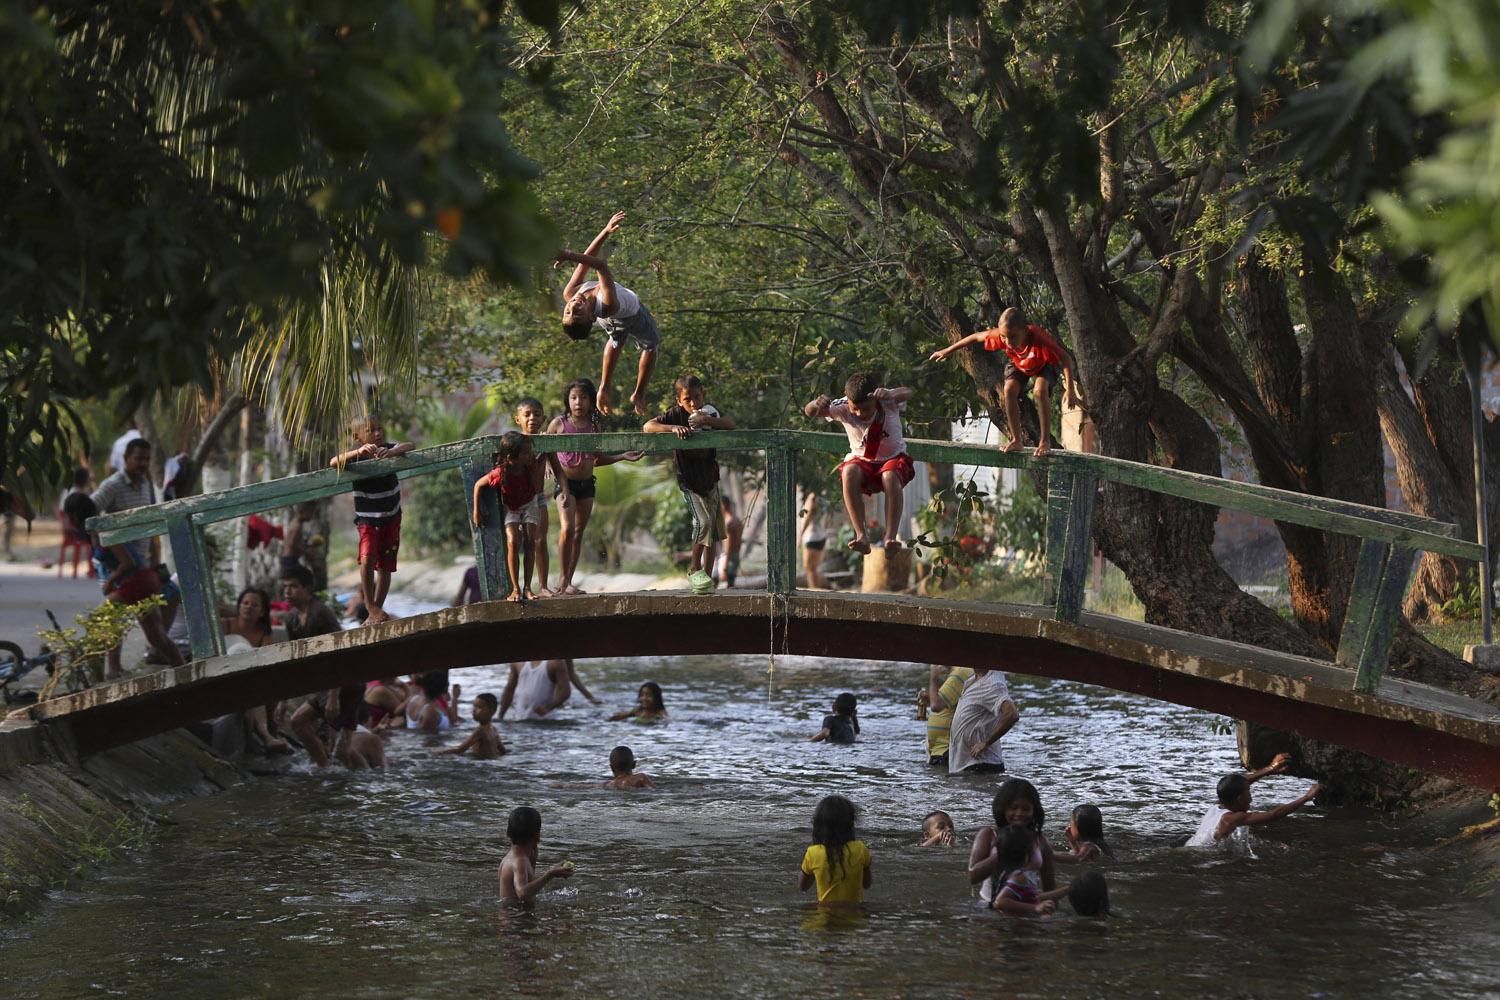 Apr. 18, 2014. Children play in an irrigation canal, the local swimming hole that runs though Aracataca, the hometown of the late Nobel laureate Gabriel Garcia Marquez along Colombia's Caribbean coast during the Holy Week holiday.